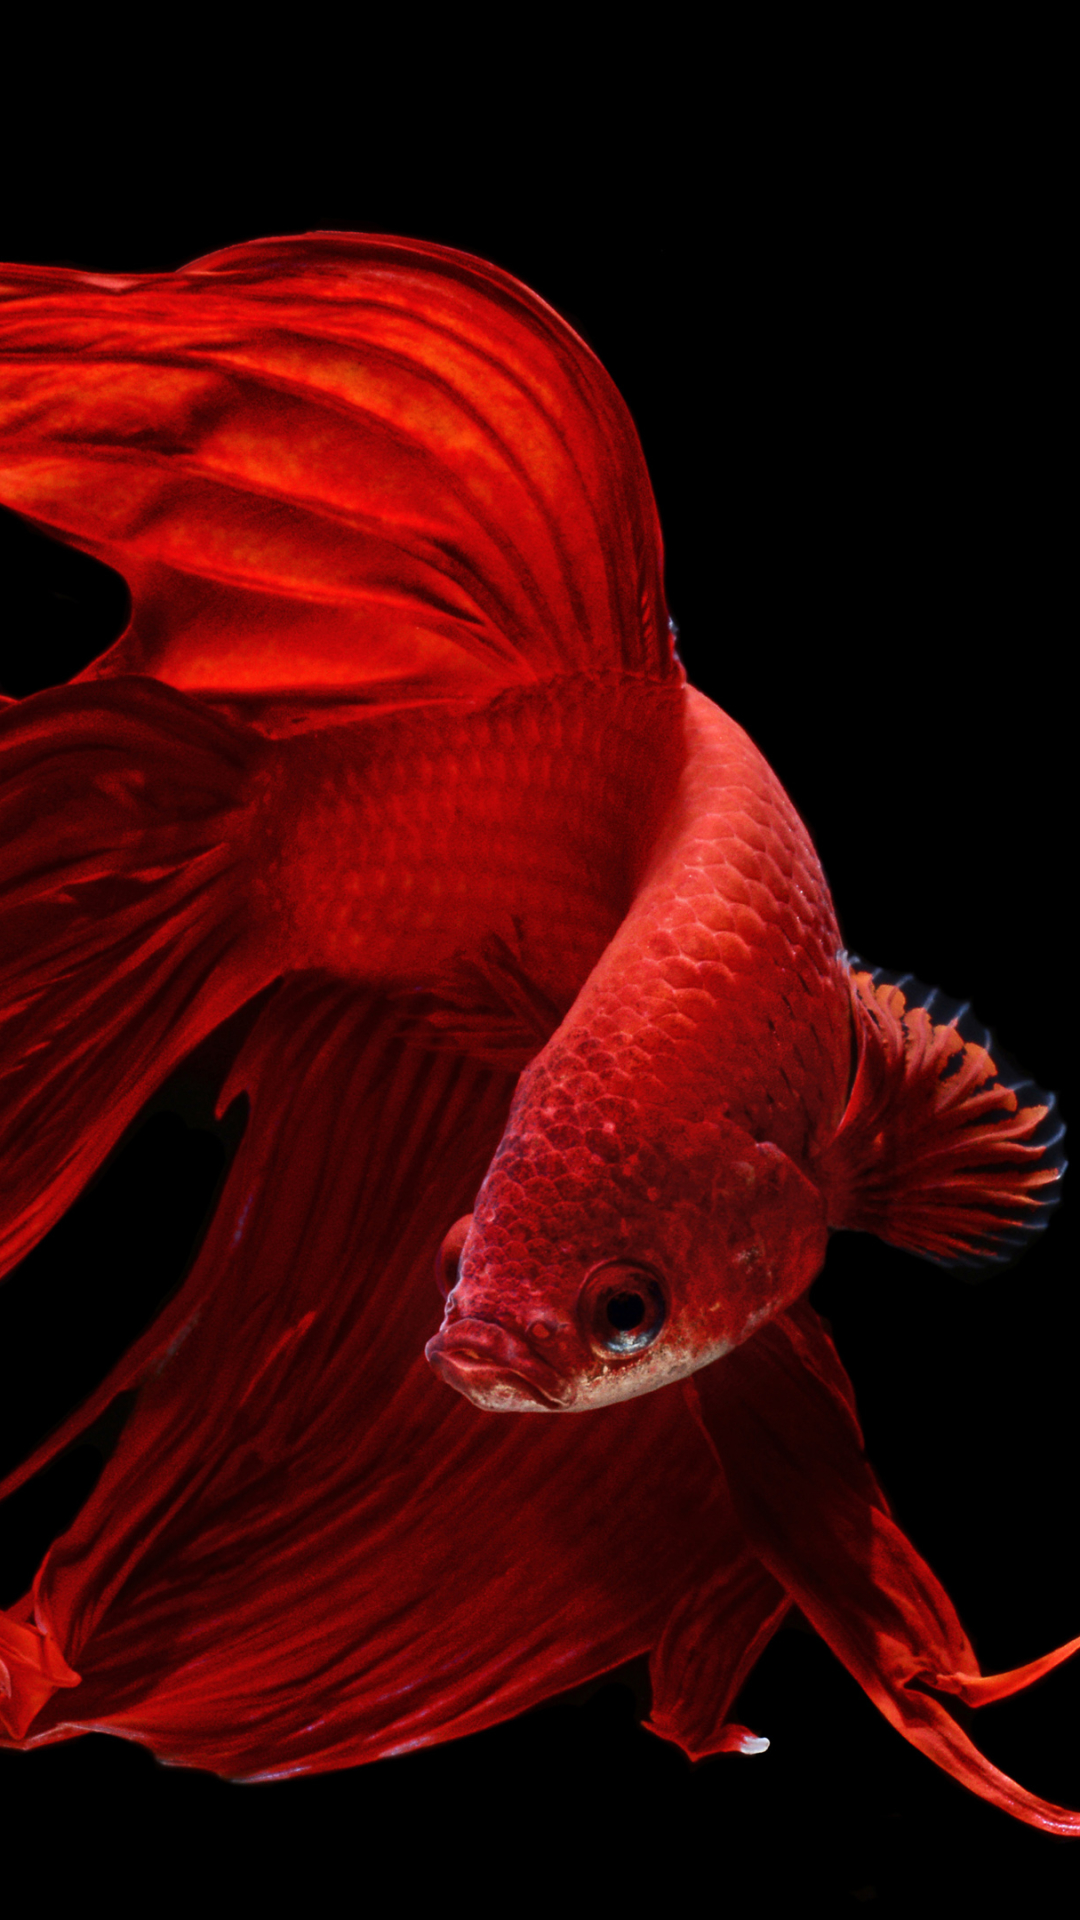 Red Fish Black Background - HD Wallpaper 